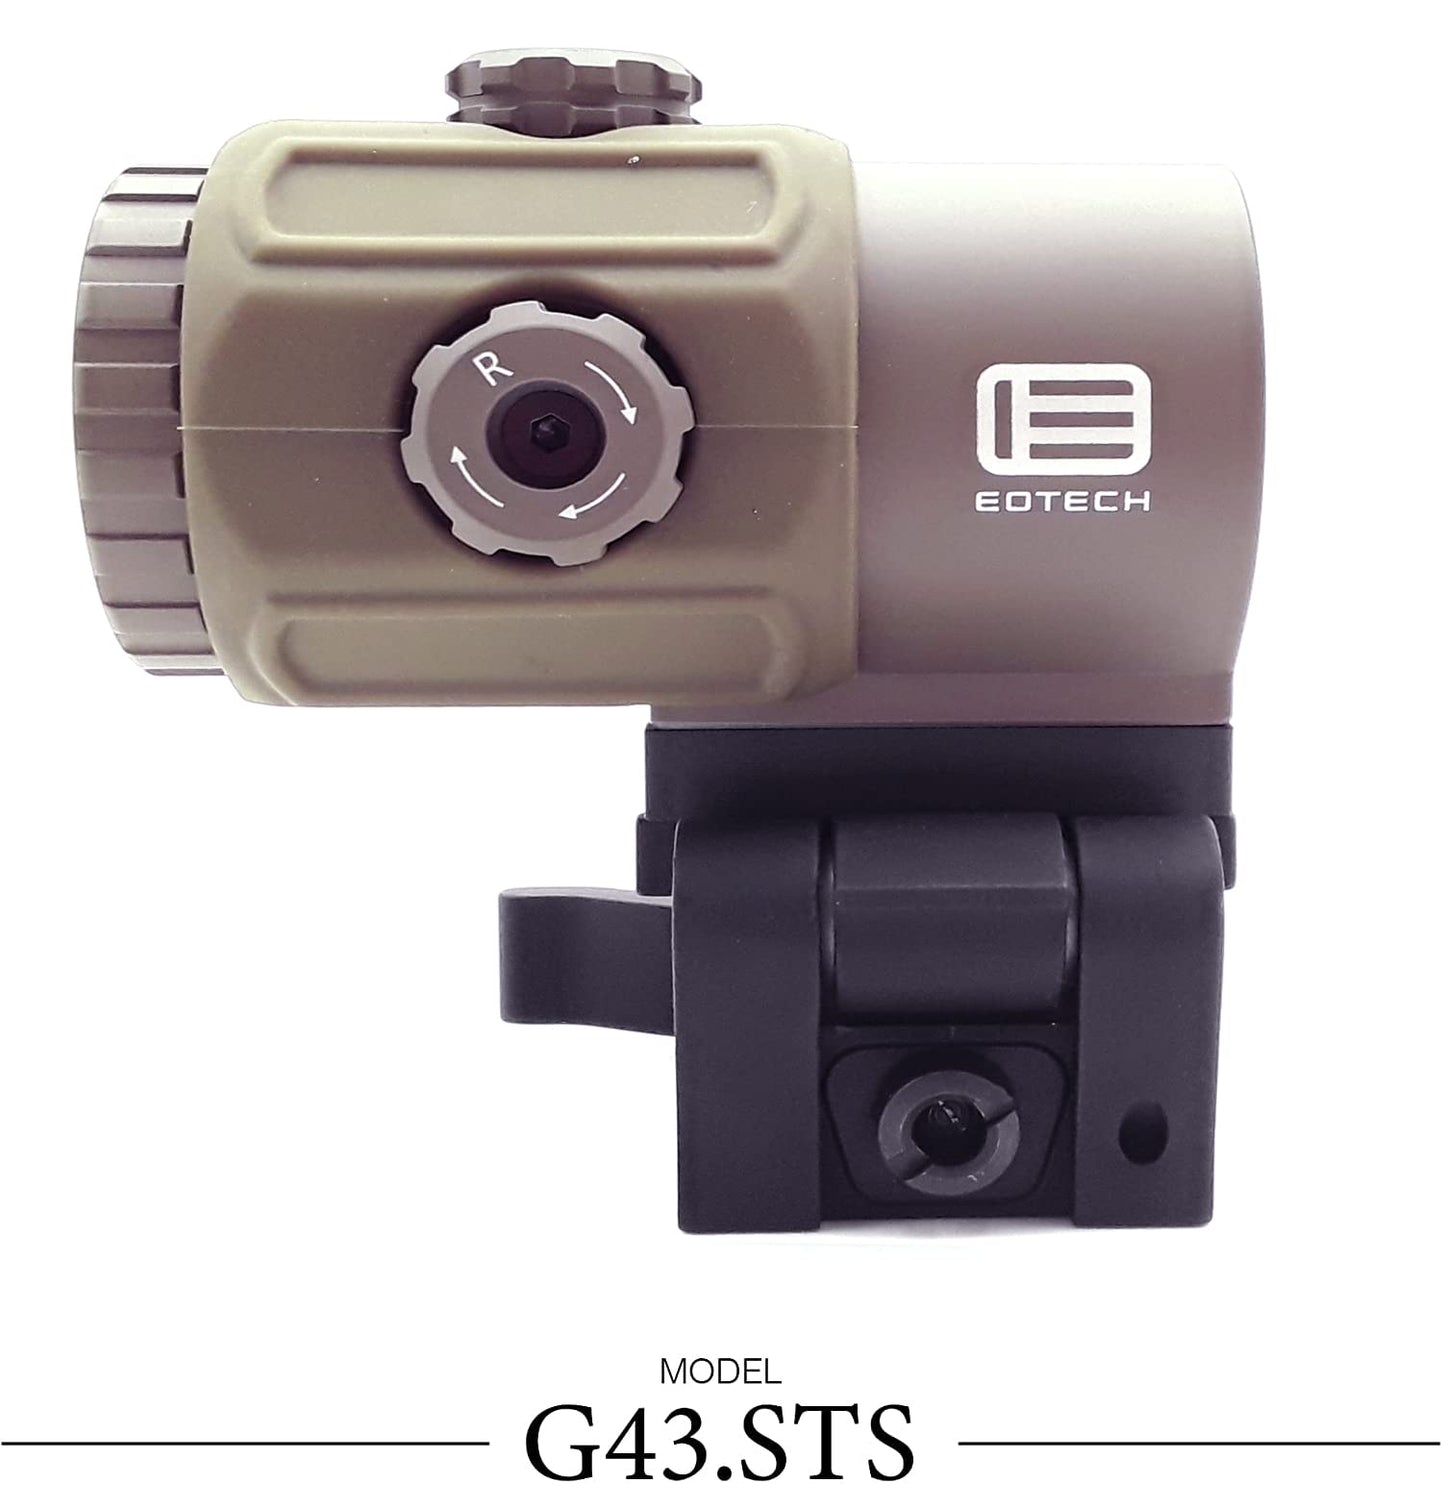 EOTECH Mico 3 power magnifer with quick disconnect, switch to side (STS) mount - G43.STSTAN